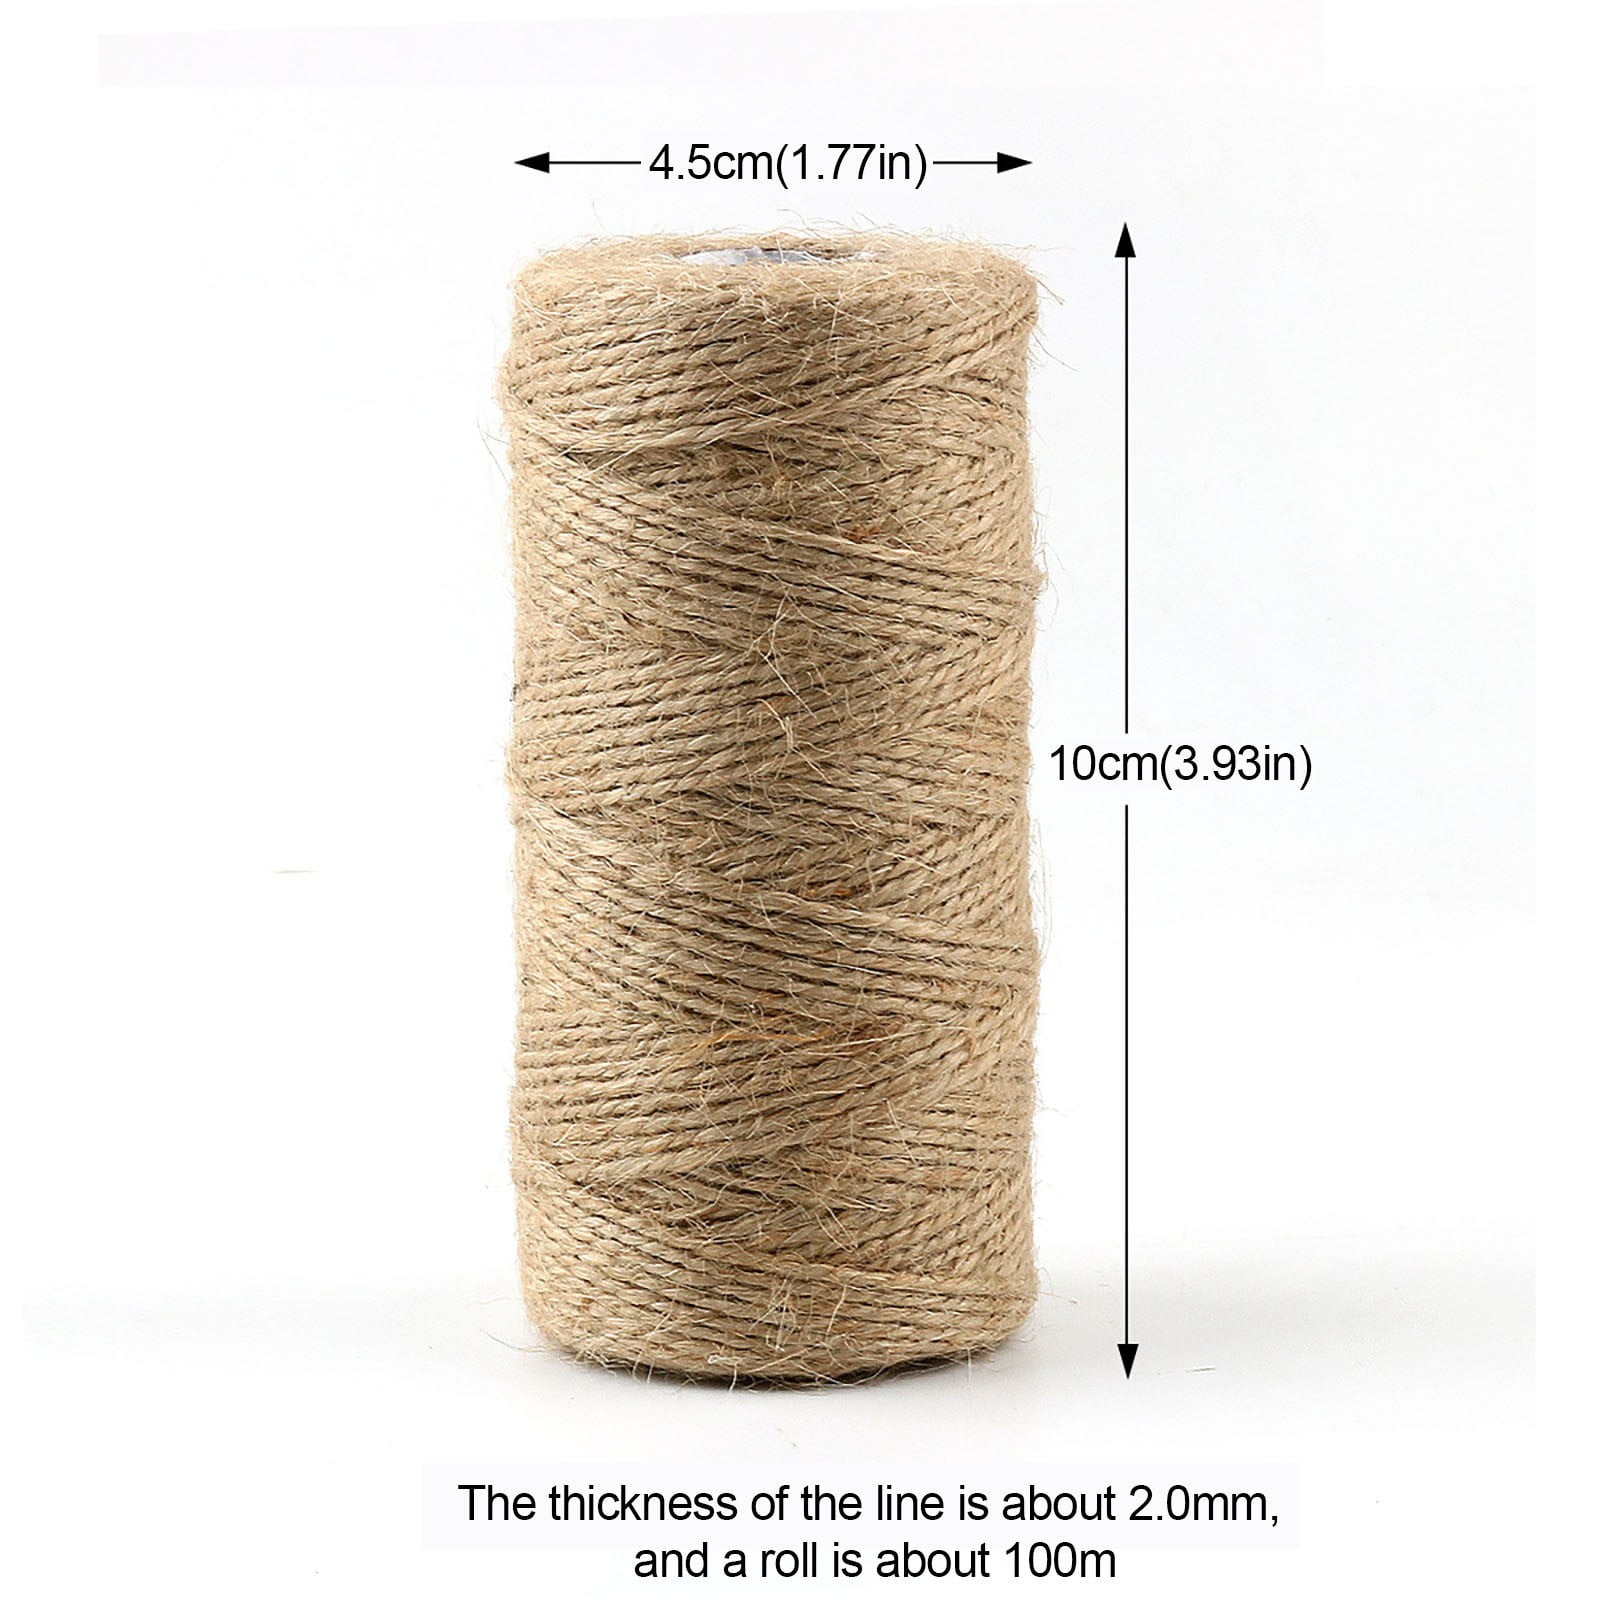 100 Feet Twisted Nautical Rope for Crafts, Thick Hemp Jute Twine, Brown  (5mm) 